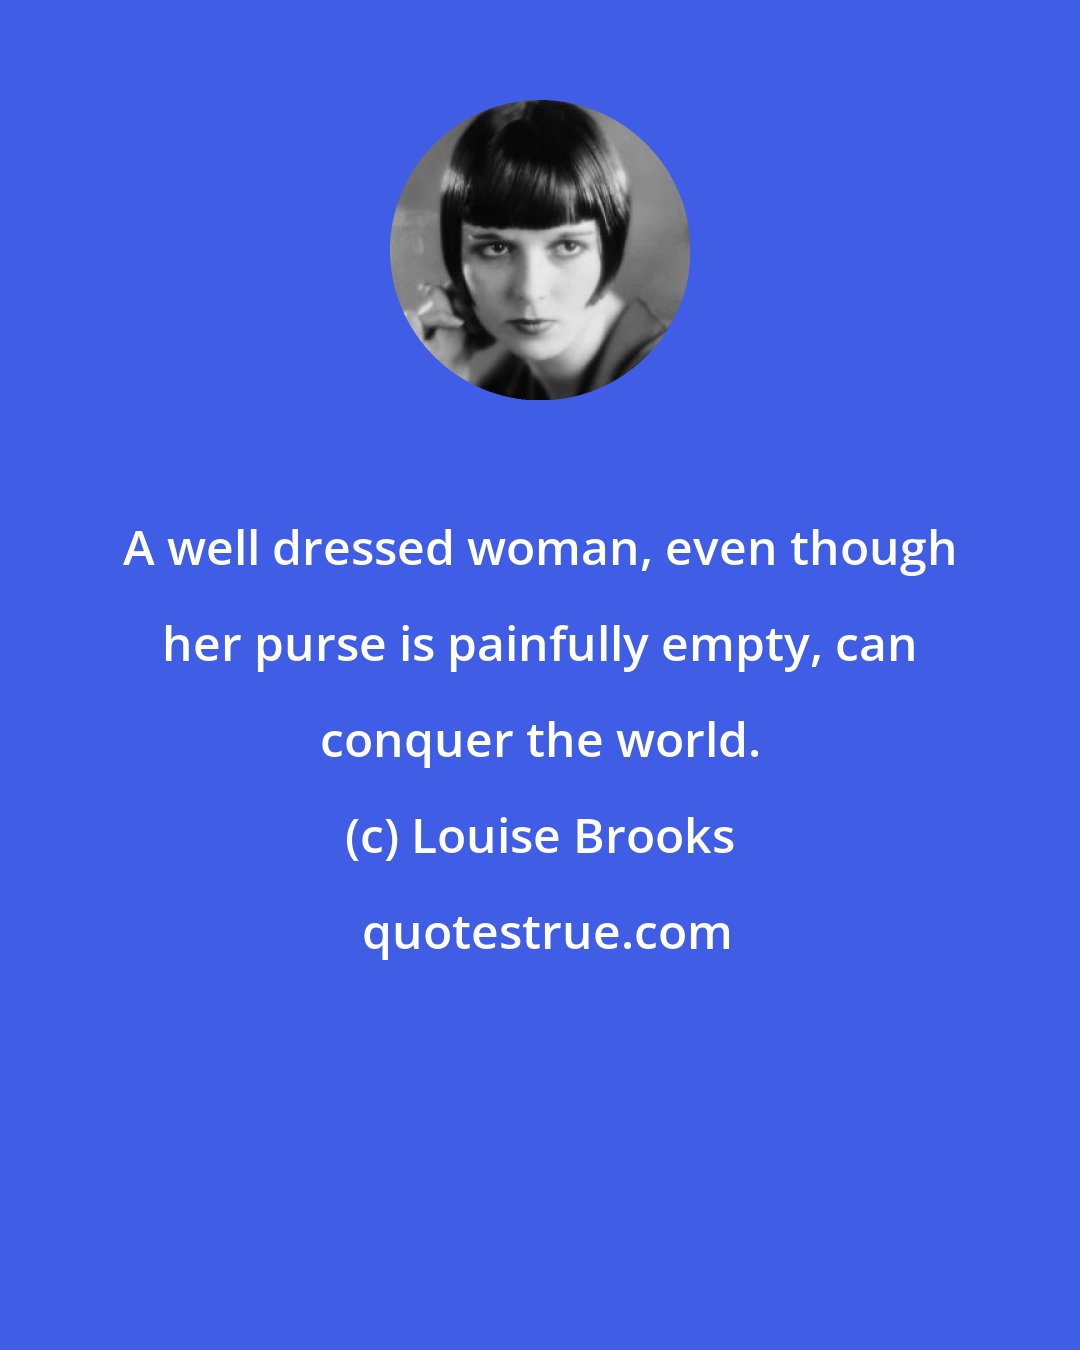 Louise Brooks: A well dressed woman, even though her purse is painfully empty, can conquer the world.